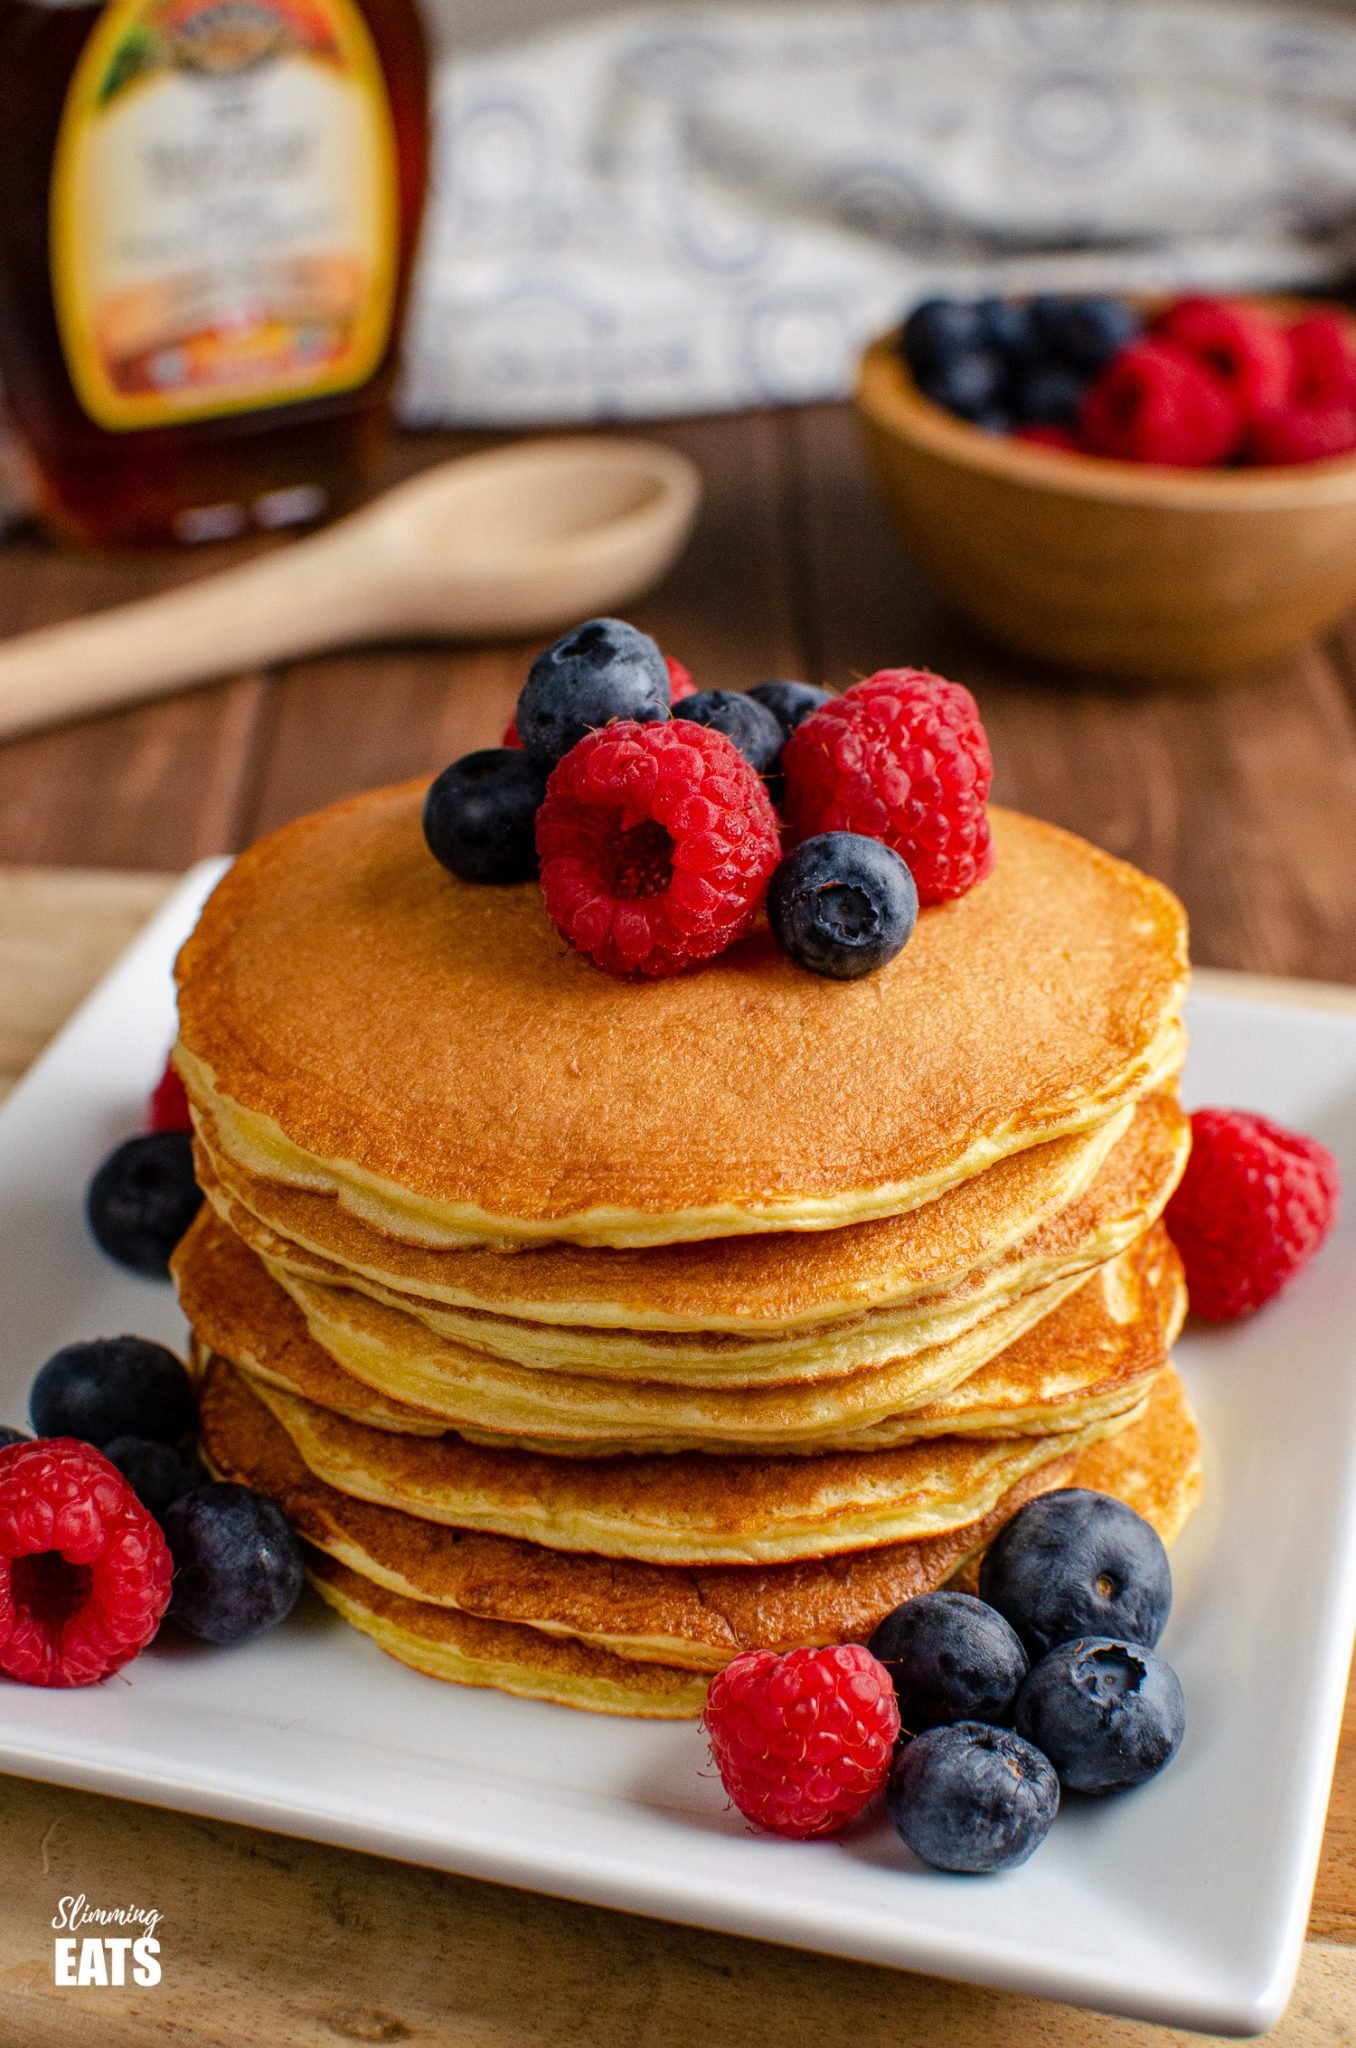 American Style Pancakes on white plate with fruit, maple syrup bottle in background